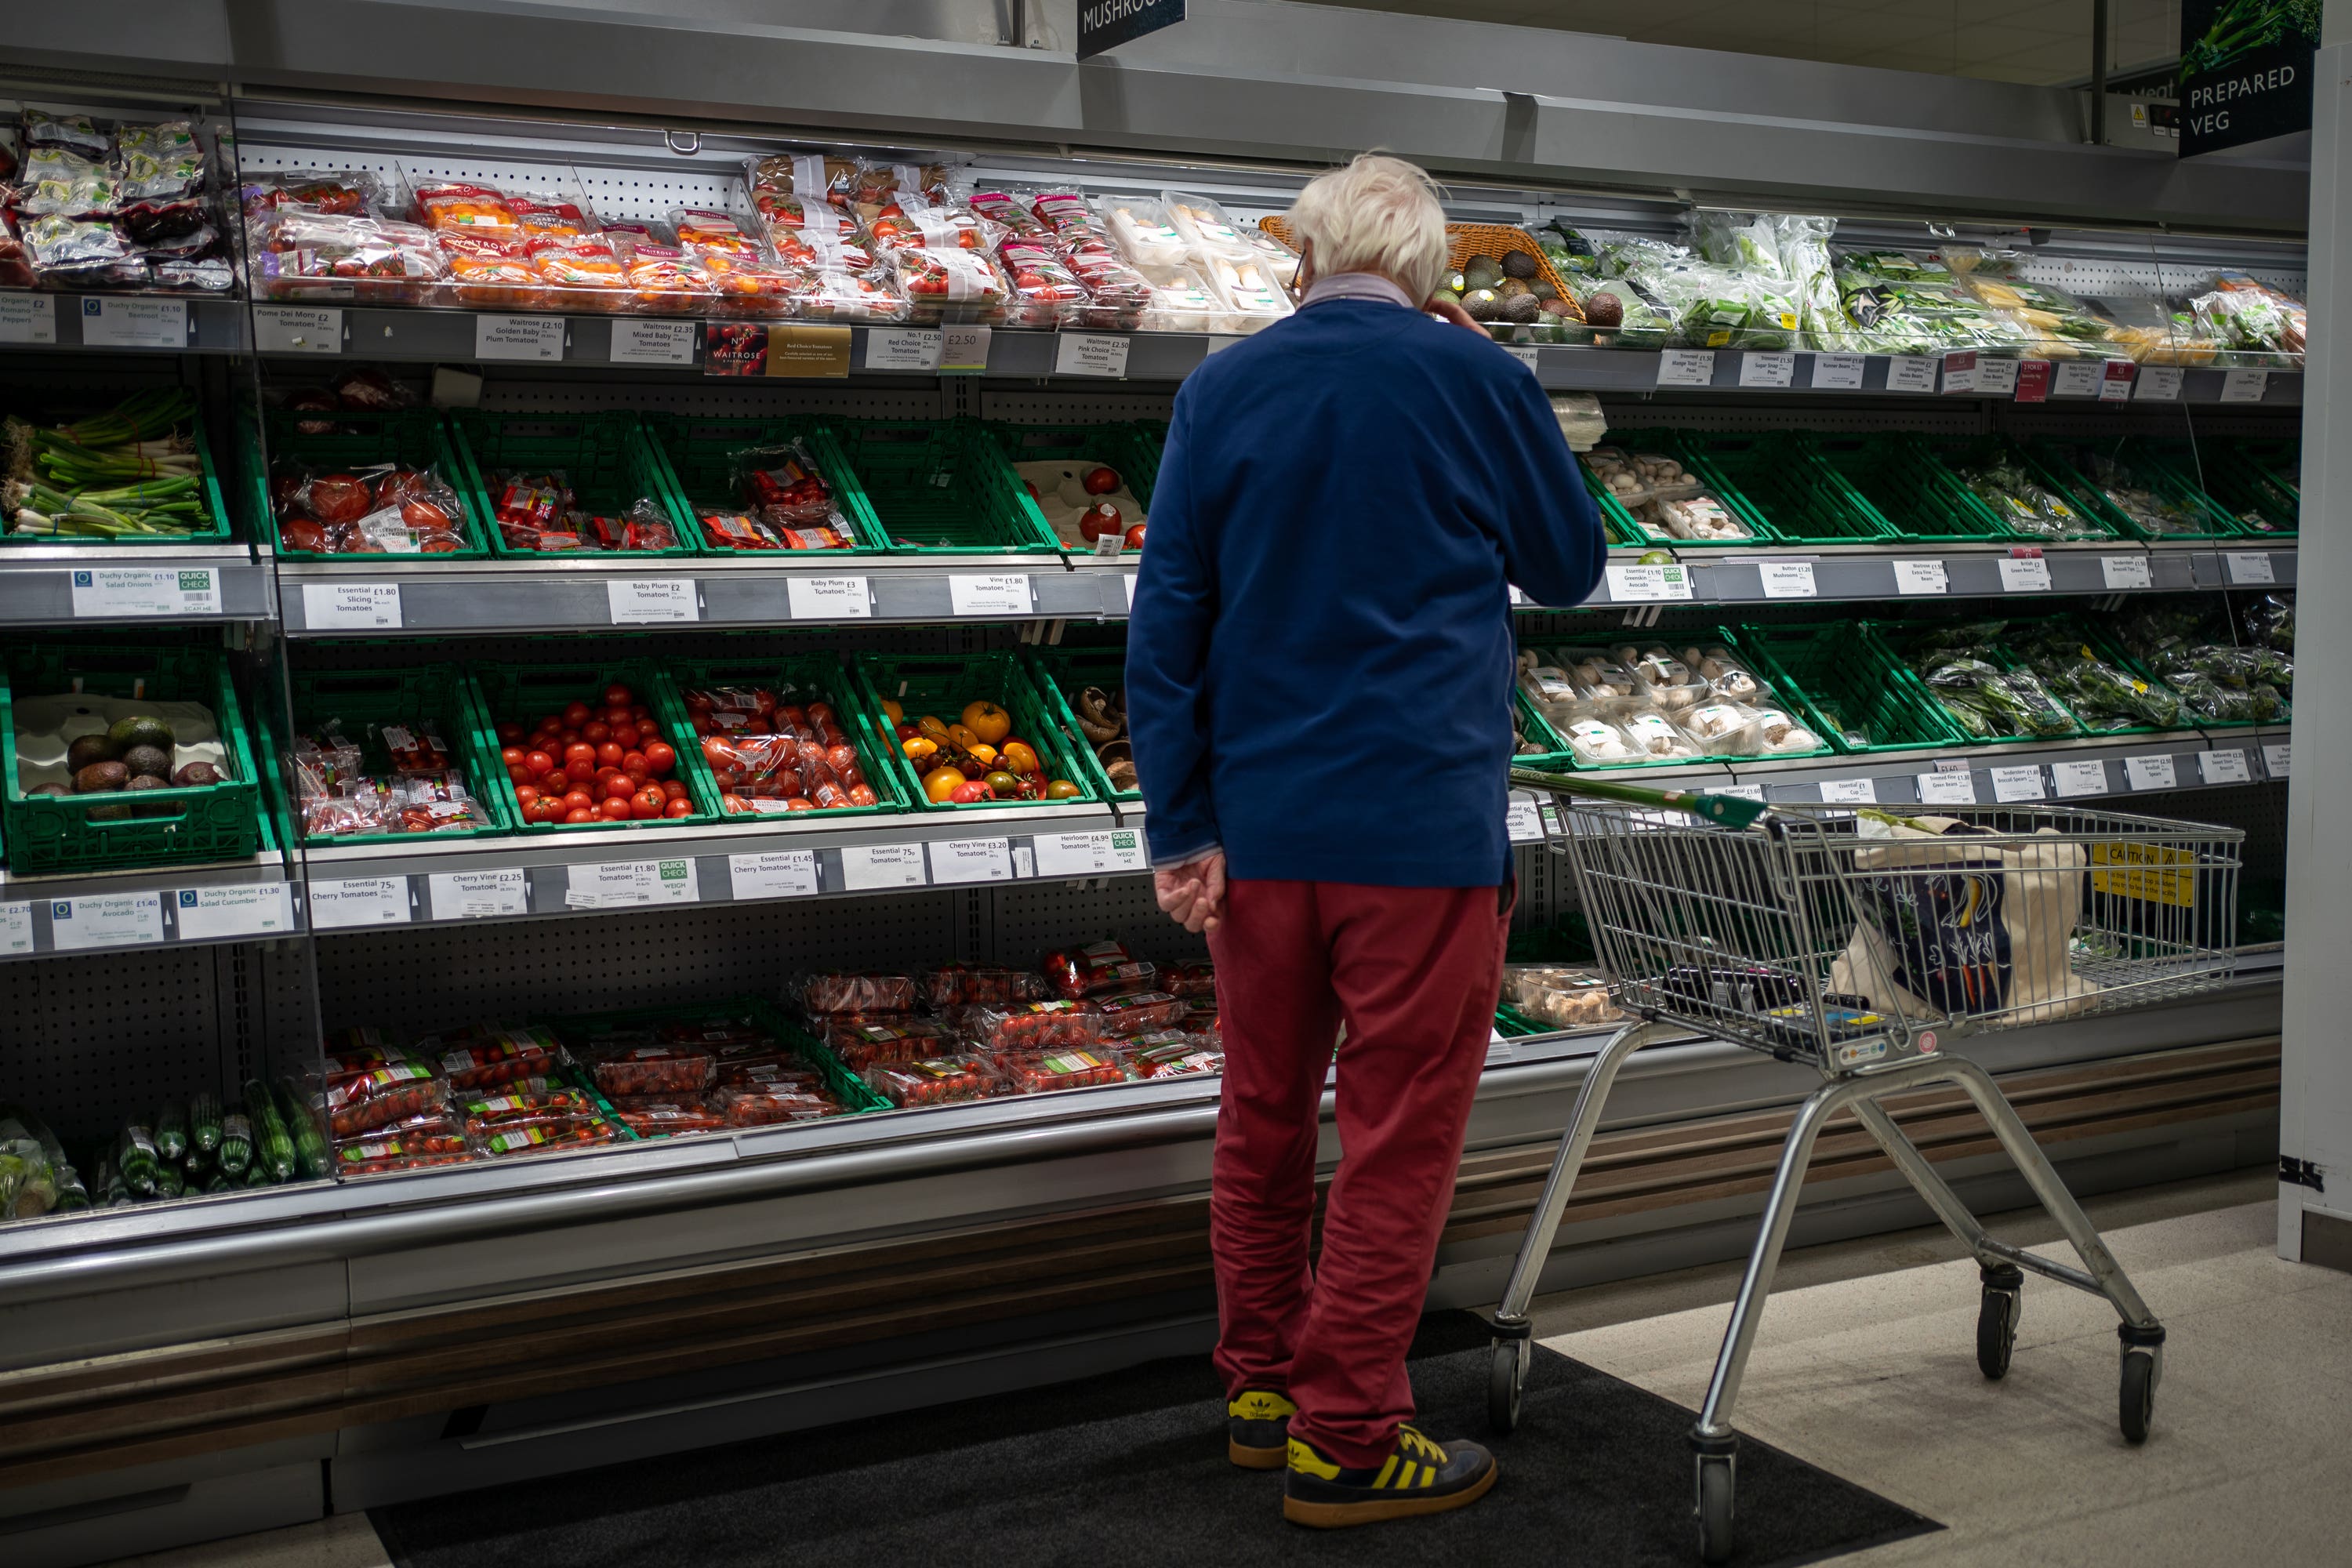 Brexit is set to lead to still higher food prices and more empty shelves